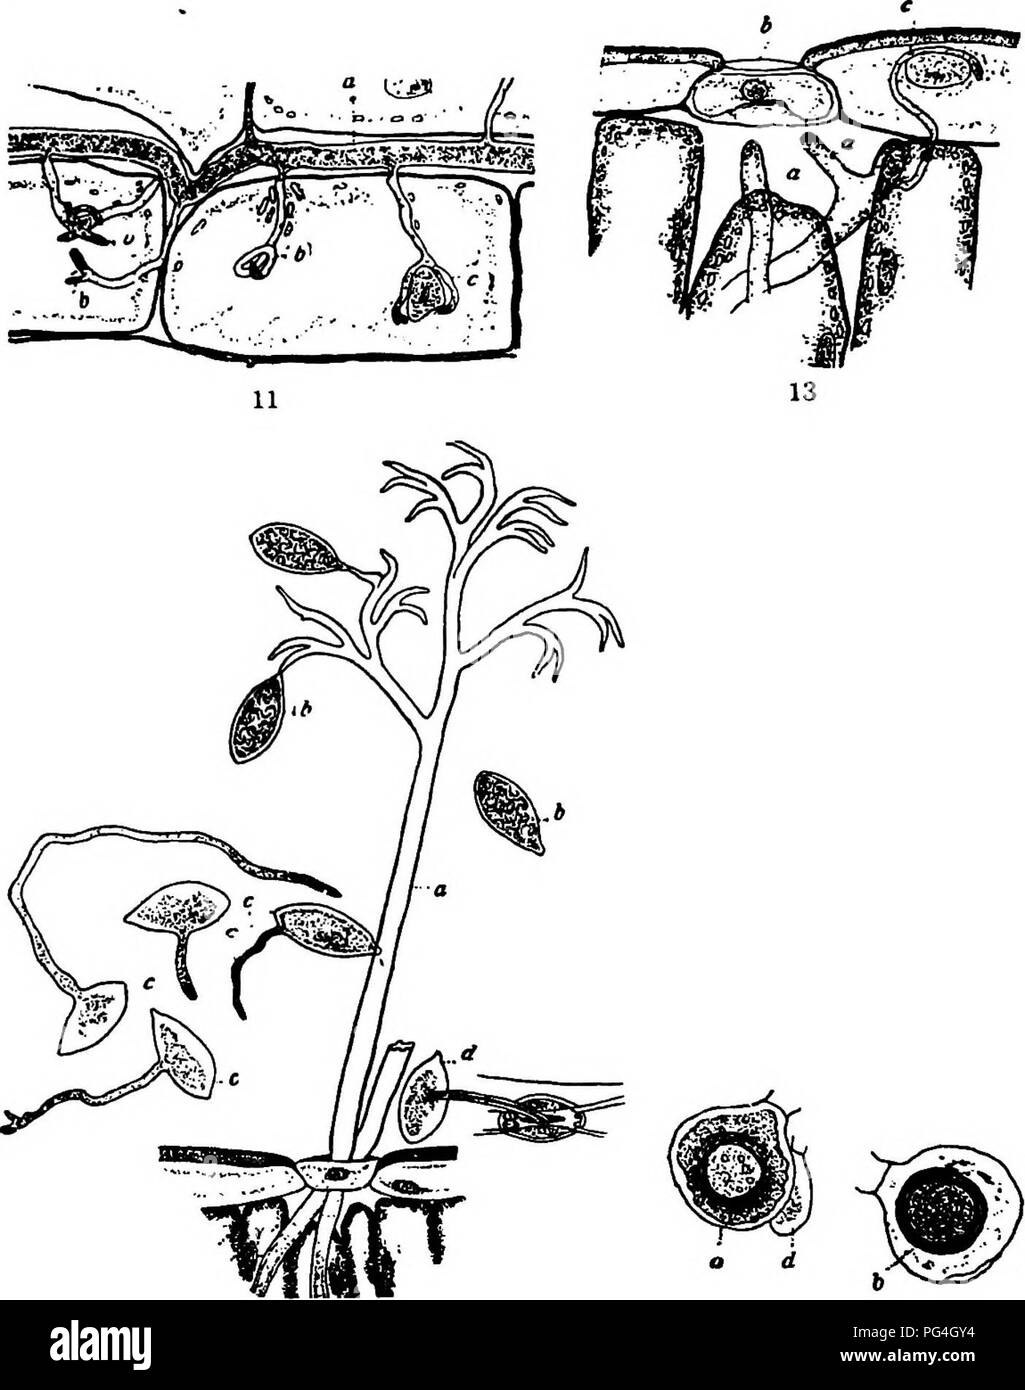 . The fungi which cause plant disease . Plant diseases; Fungi. 98 THE FUNGI WHICH CAUSE PLANT DISEASE. 14 15 Fio. 67.—^P. Bchlcideni. 11. Mycelial threads between the large conductive cells of the leaf; (a) the mycelial thread; (b, b) branched or coiled haustoria; (c) branched haustorium wrapped about the nucleus. 13. Young conidiophorcs, (a, a) turn- ing toward the stoma, (b); (c) haustorium wrapped about the nucleus of the epidermal cell. 14. Mature conidiophore (a) with mature conidia, (c, c); (d) germ tube of conidium entering stoma. 15. Oospores, (a) mature oospore with old antheridium, ( Stock Photo